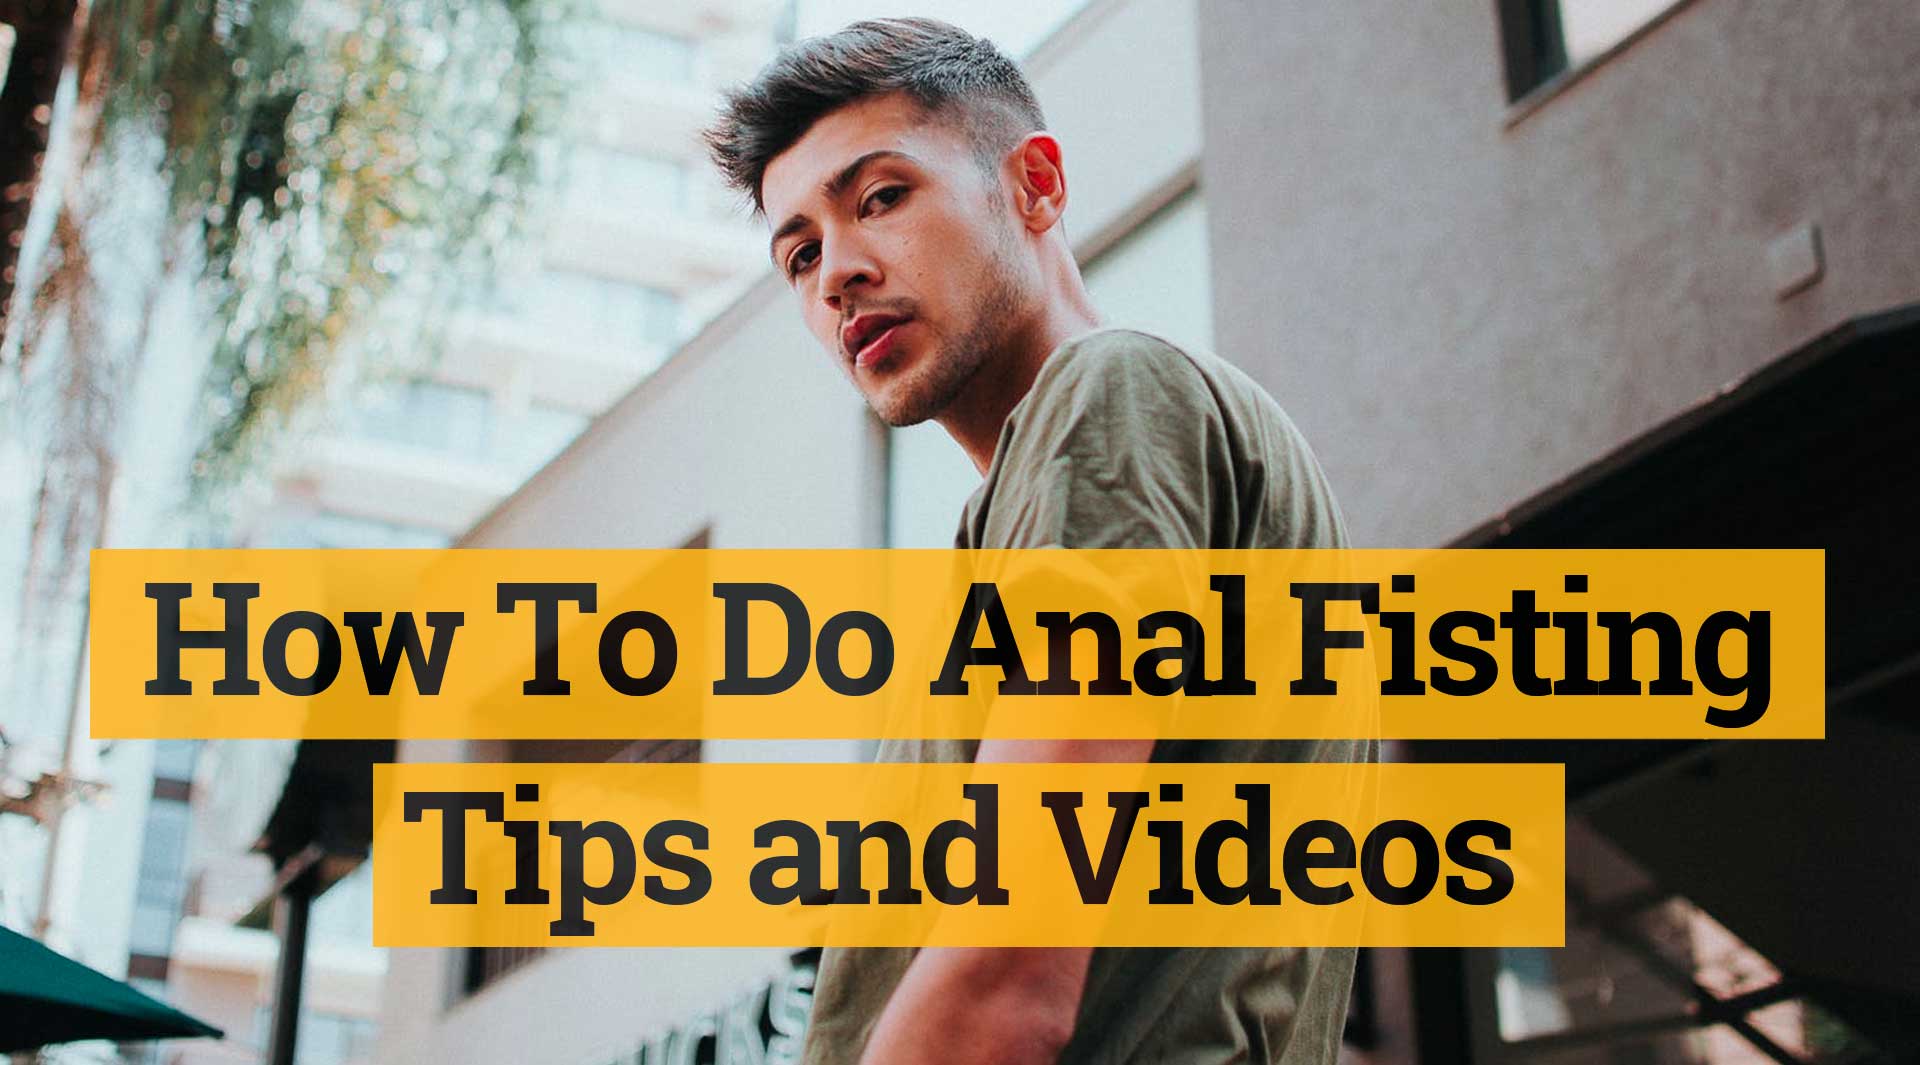 Ump reccomend howto anal fist